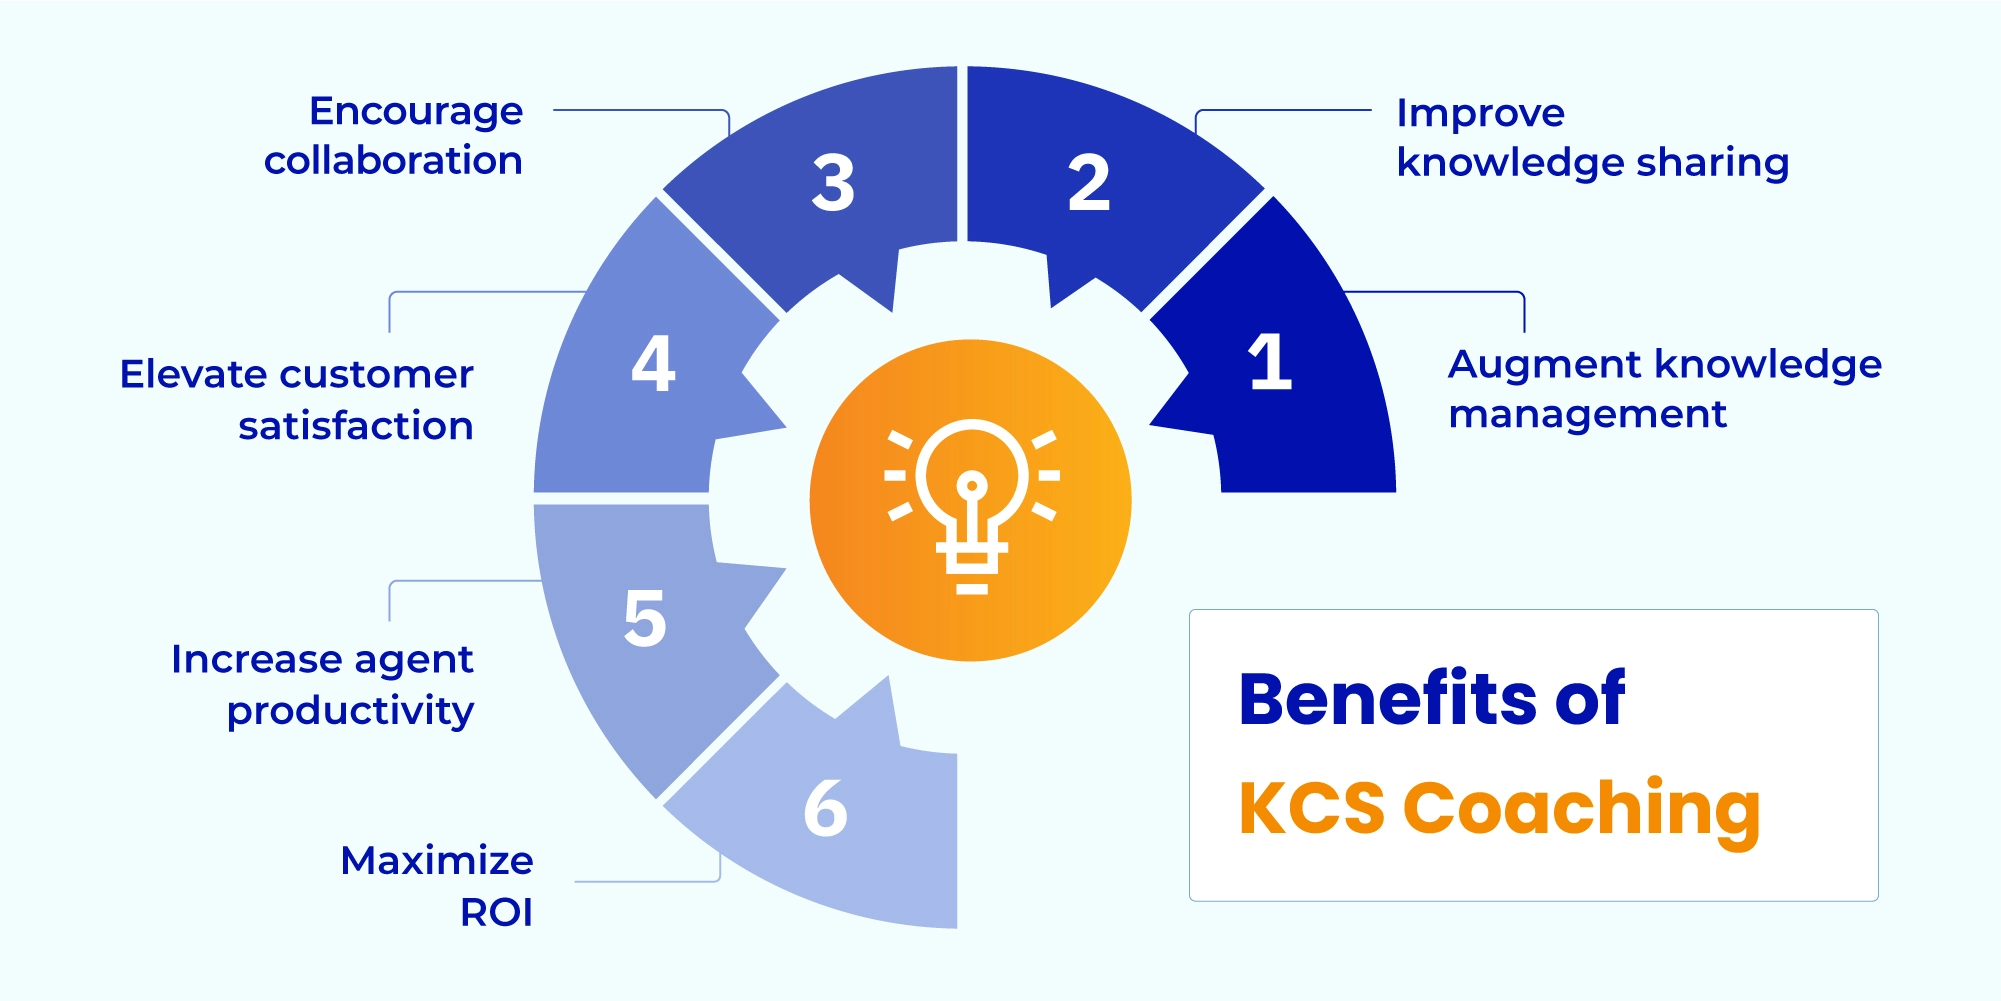 KCS Coaching: The Secret To Building a Knowledge-first Culture for Impeccable Customer Service